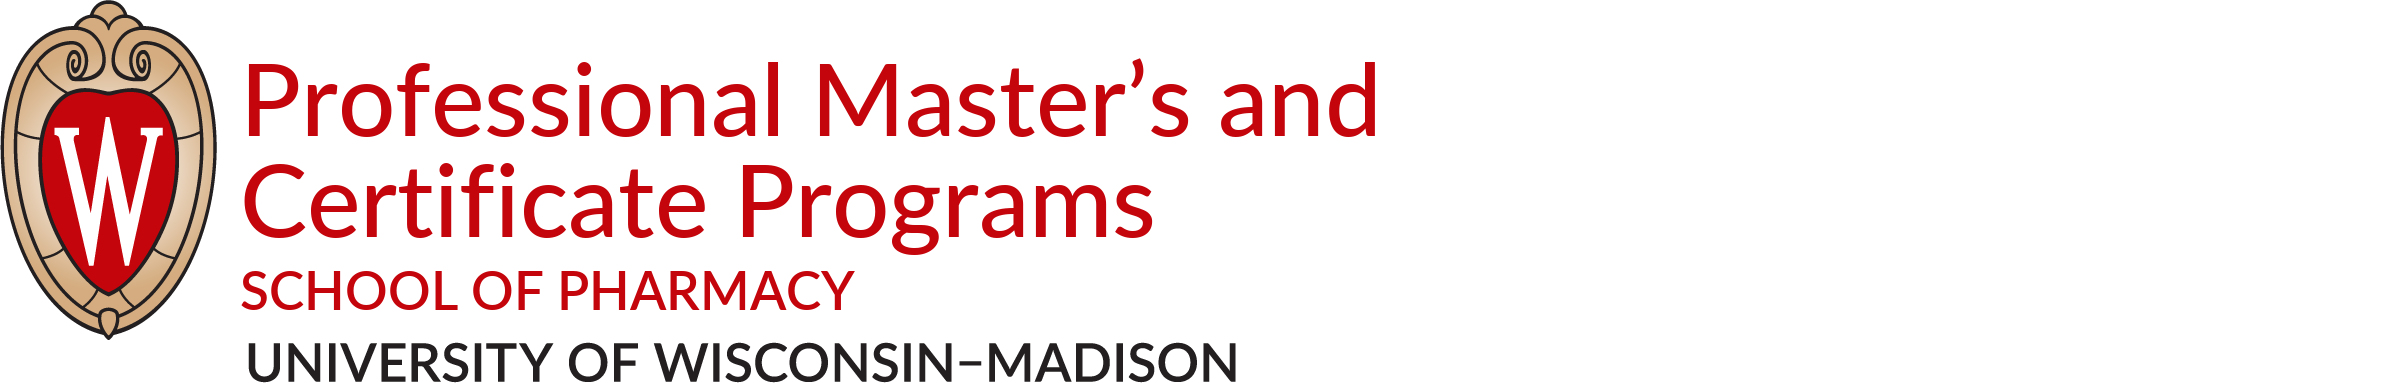 University of Wisconsin-Madison School of Pharmacy, Professional Master's and Certificate Programs